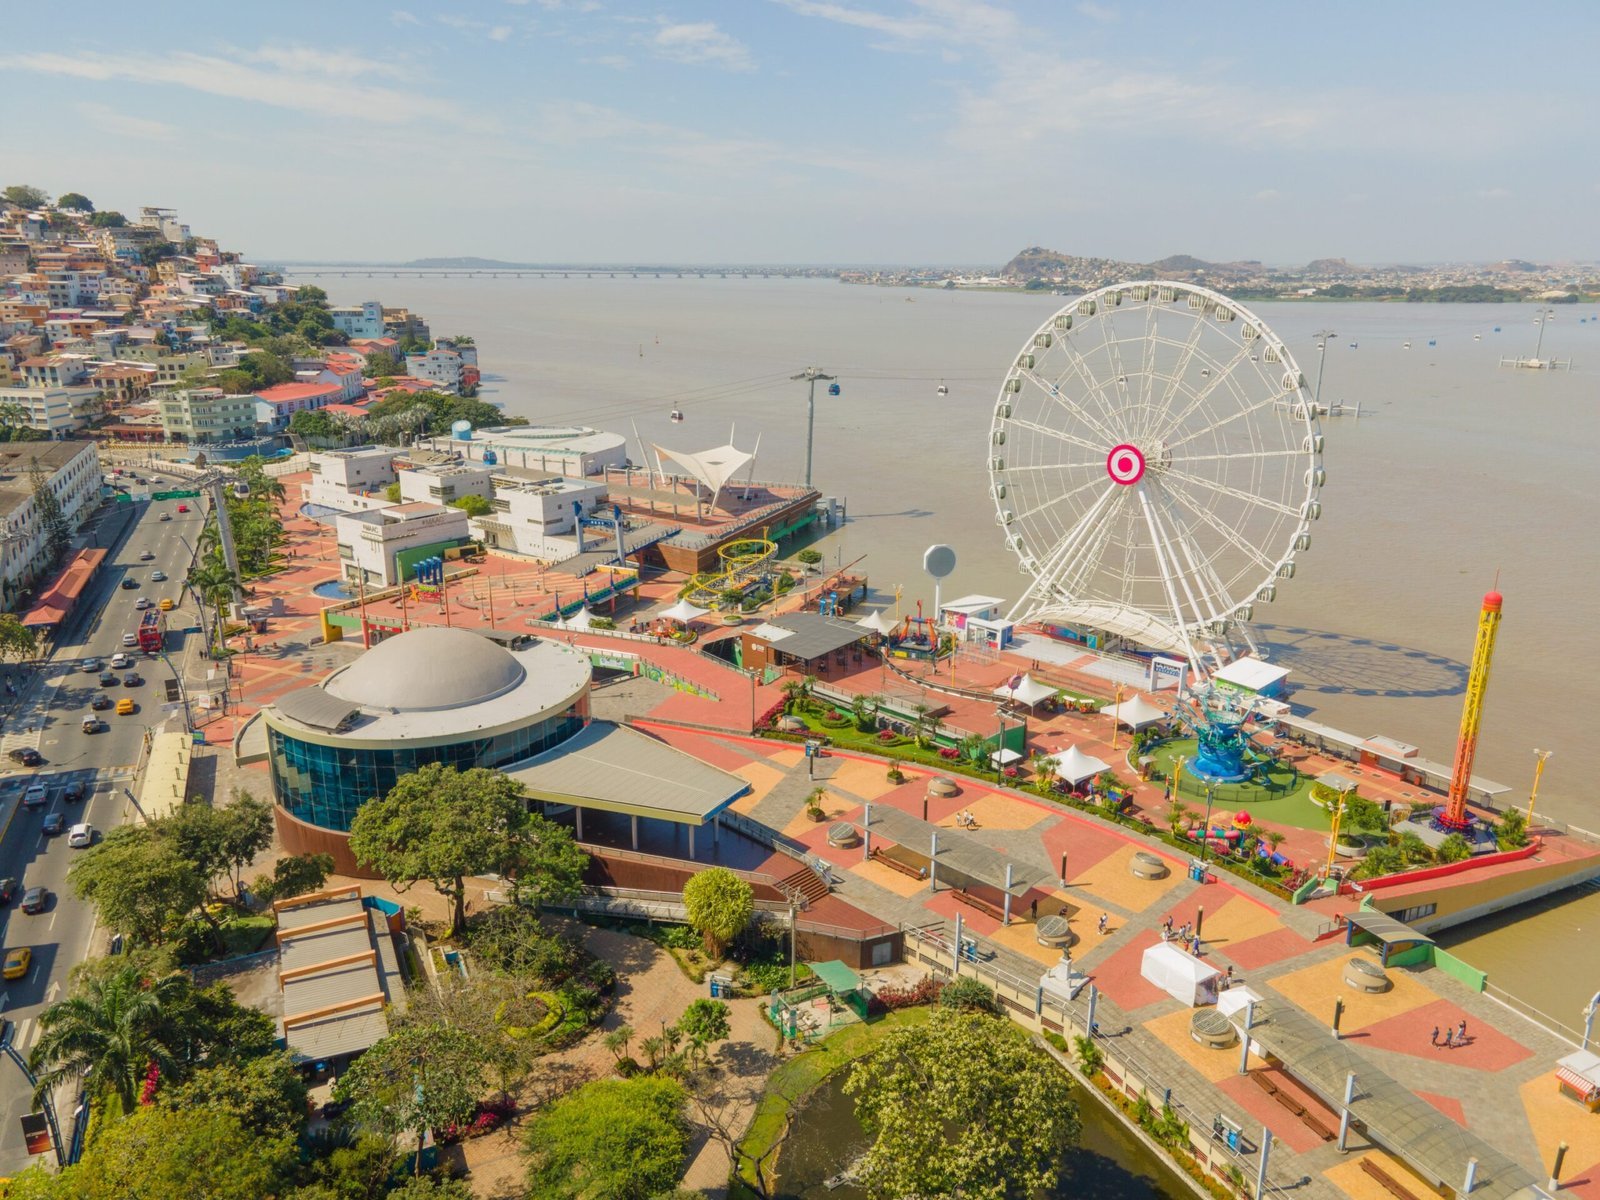 Self-guided walking tour of Guayaquil’s landmarks.